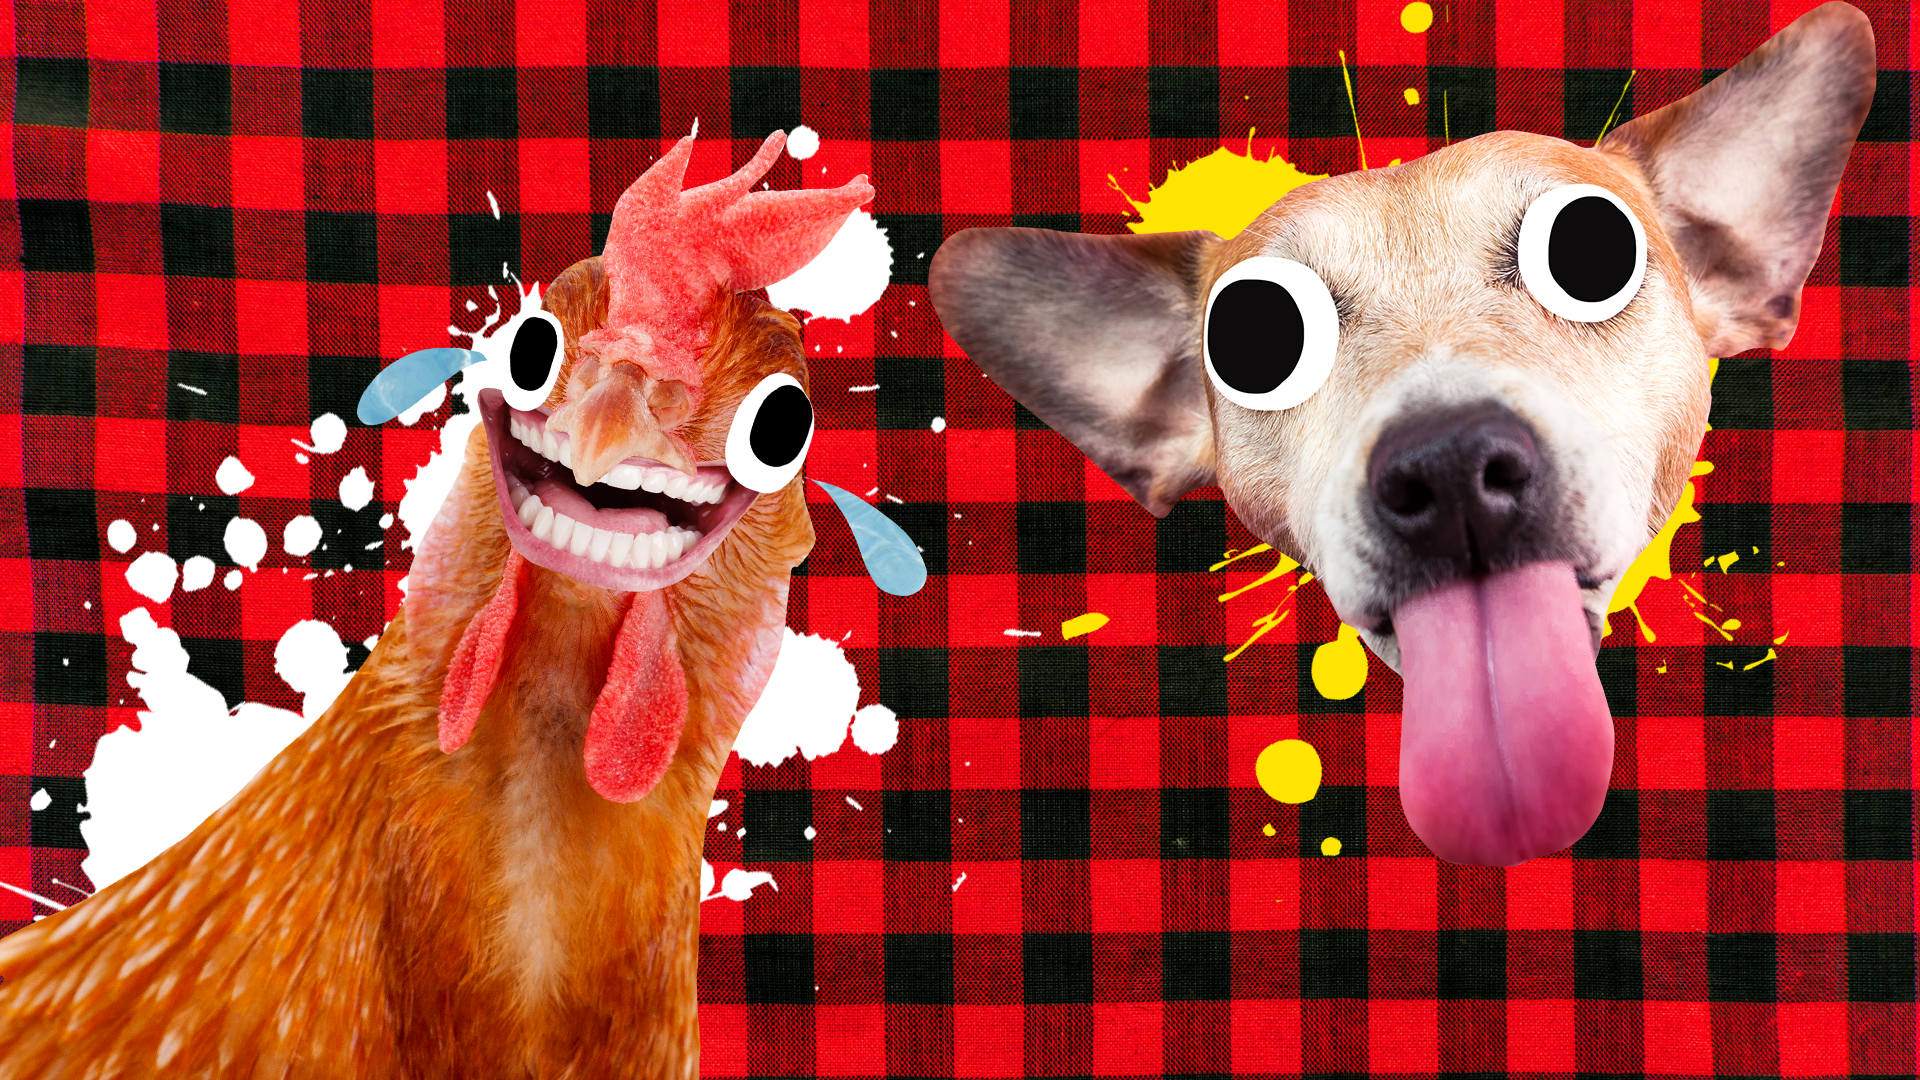 A laughing chicken and dog